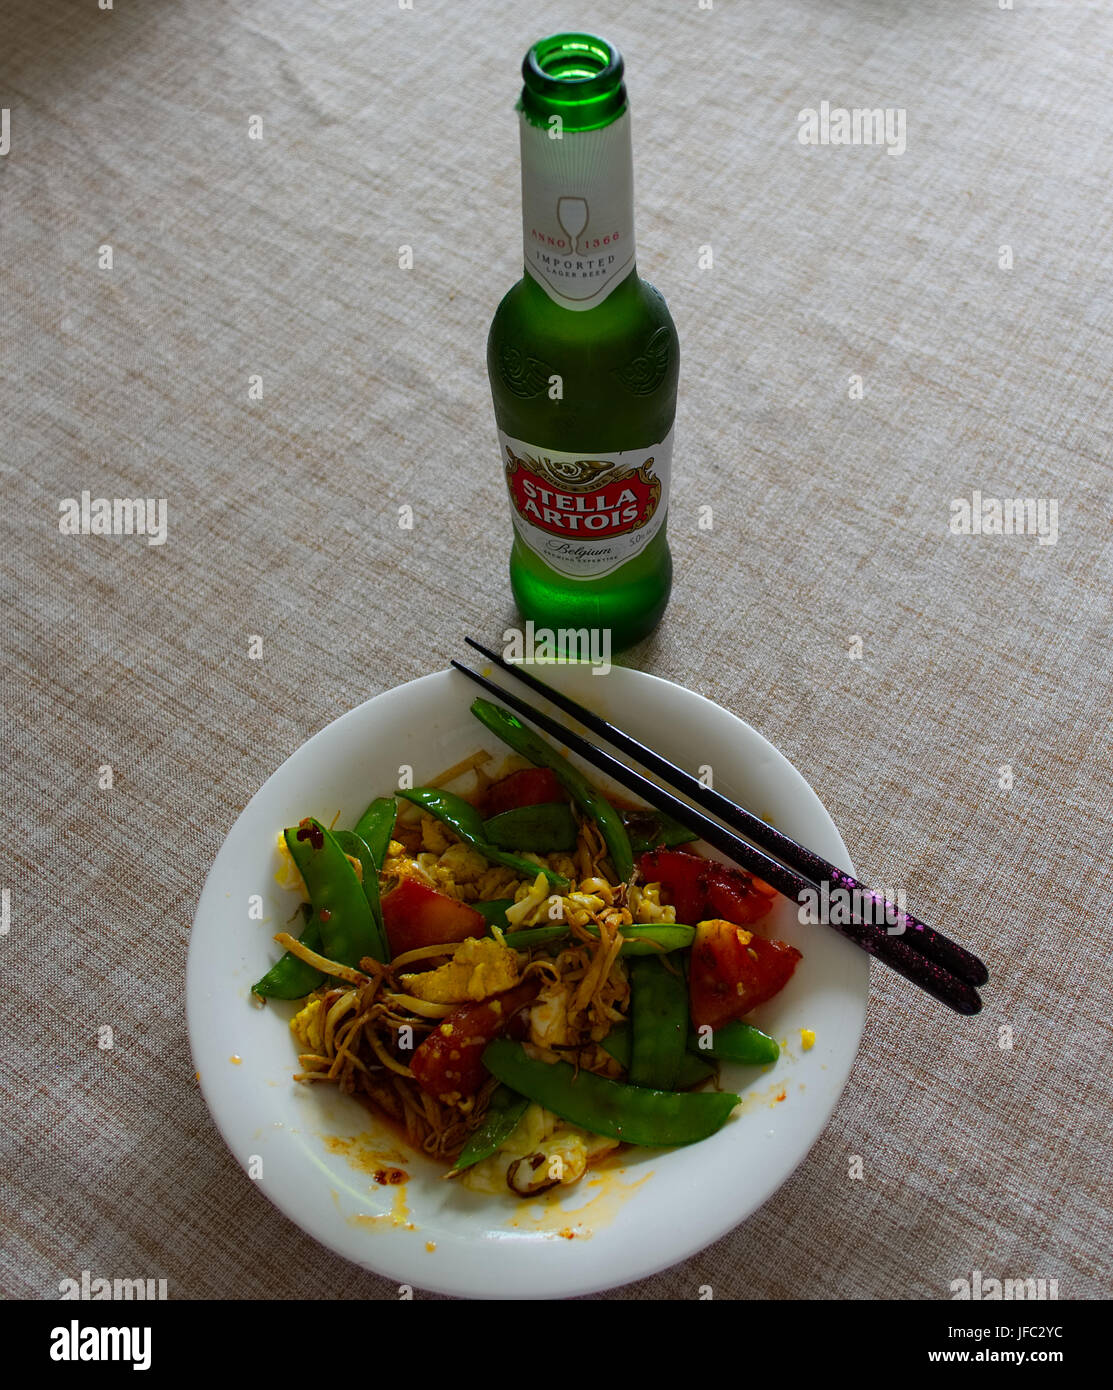 Chinese food plate of simple meals Stock Photo